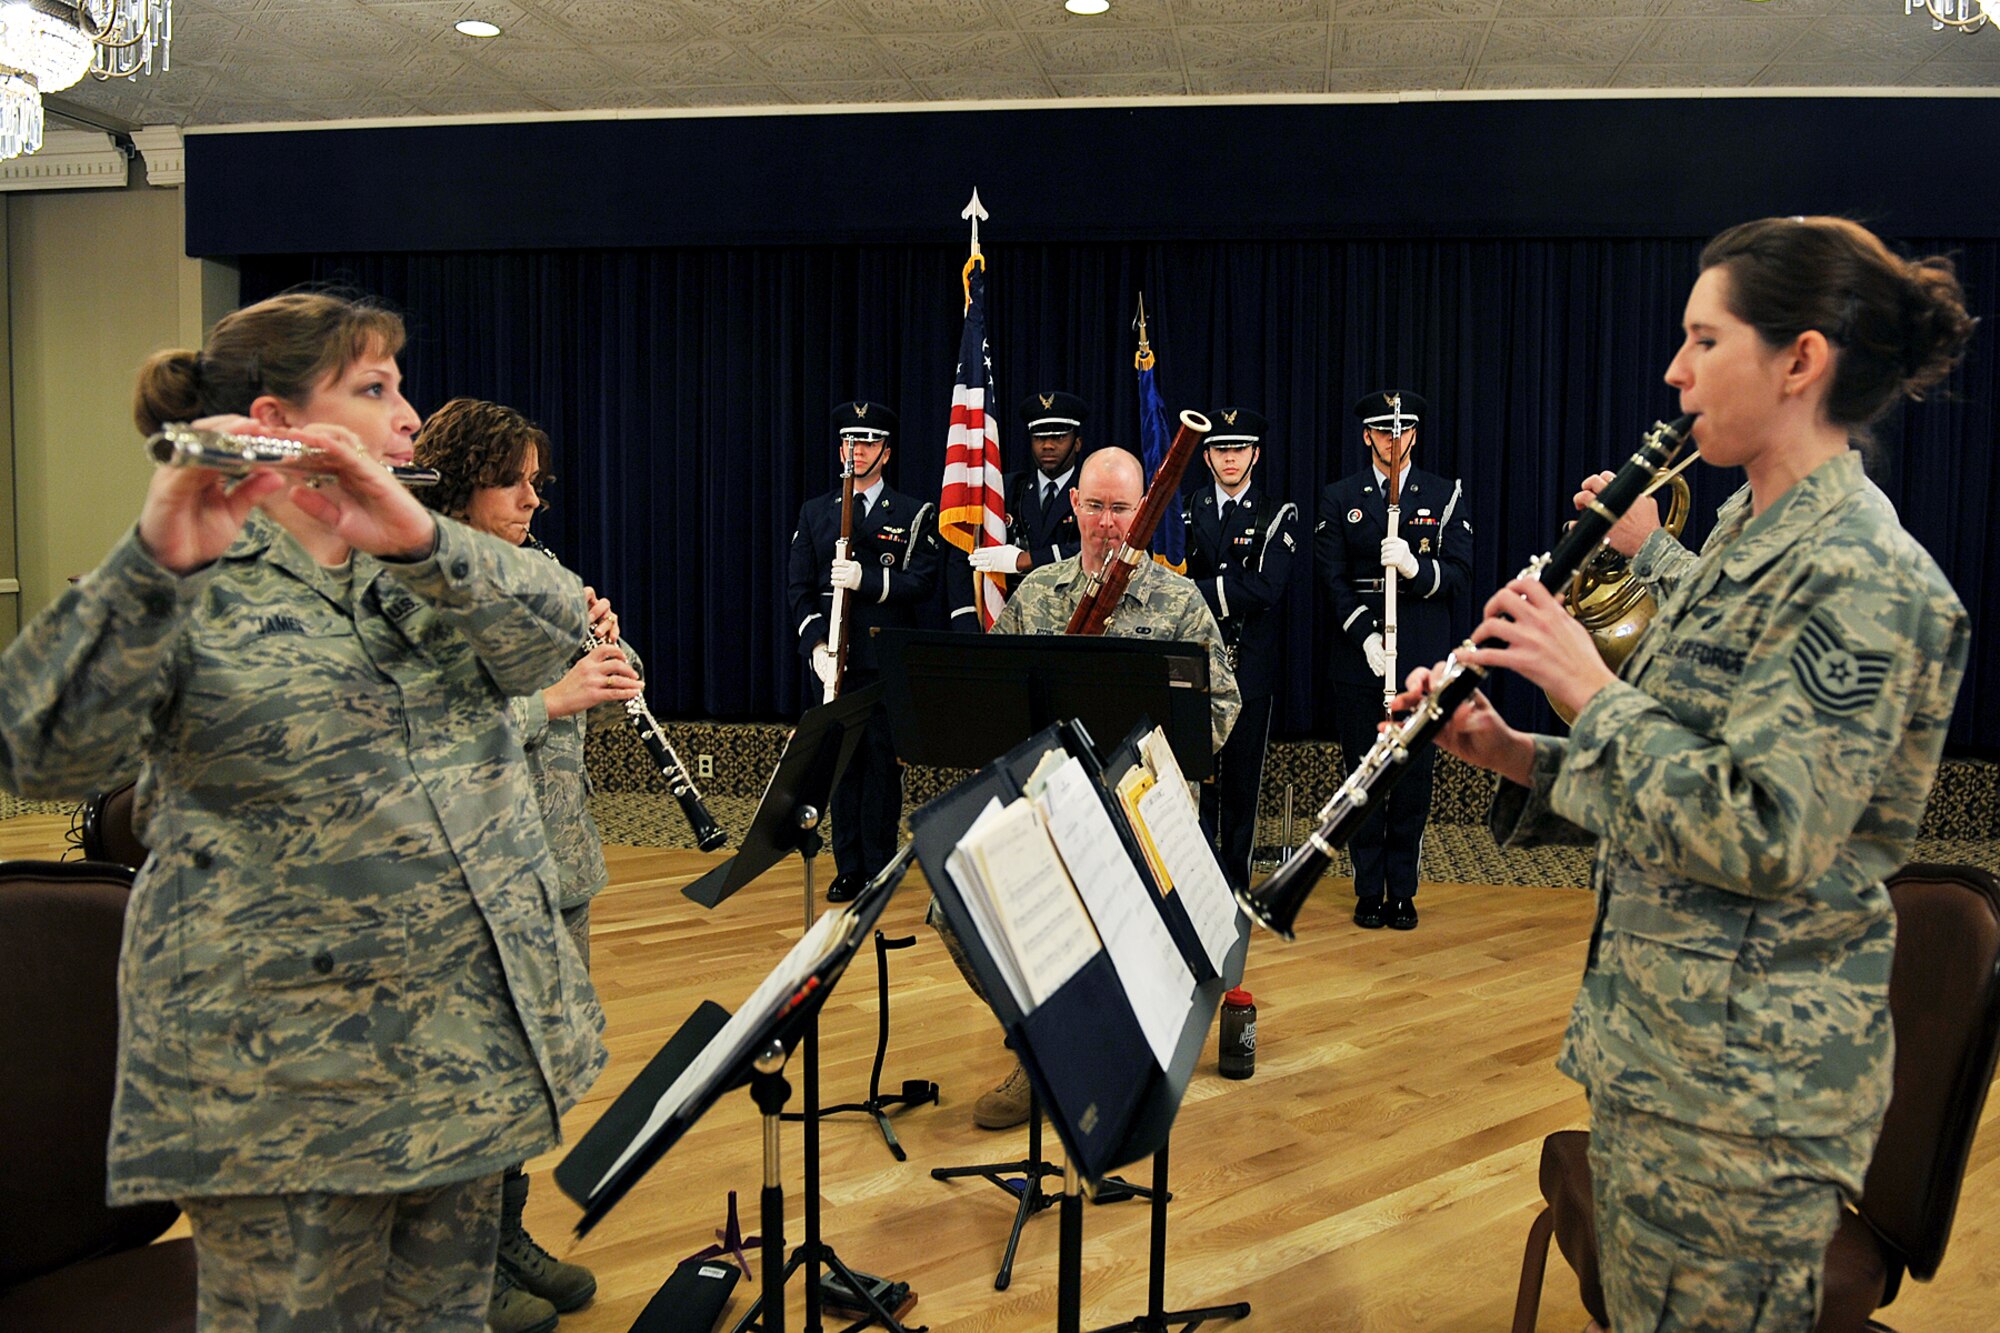 OFFUTT AIR FORCE BASE, Neb. - Heartland of America Band, Winds of Freedom, plays the National Anthem while members of the Offutt Air Force Base Honor Guard posts the colors during the national prayer luncheon inside the Patriot Club March 10. Throughout this luncheon many of Offutt's personnel representing different faiths and backgrounds came together to pray for warriors fighting for our nation and our families. U.S. Air Force Photo by Charles Haymond